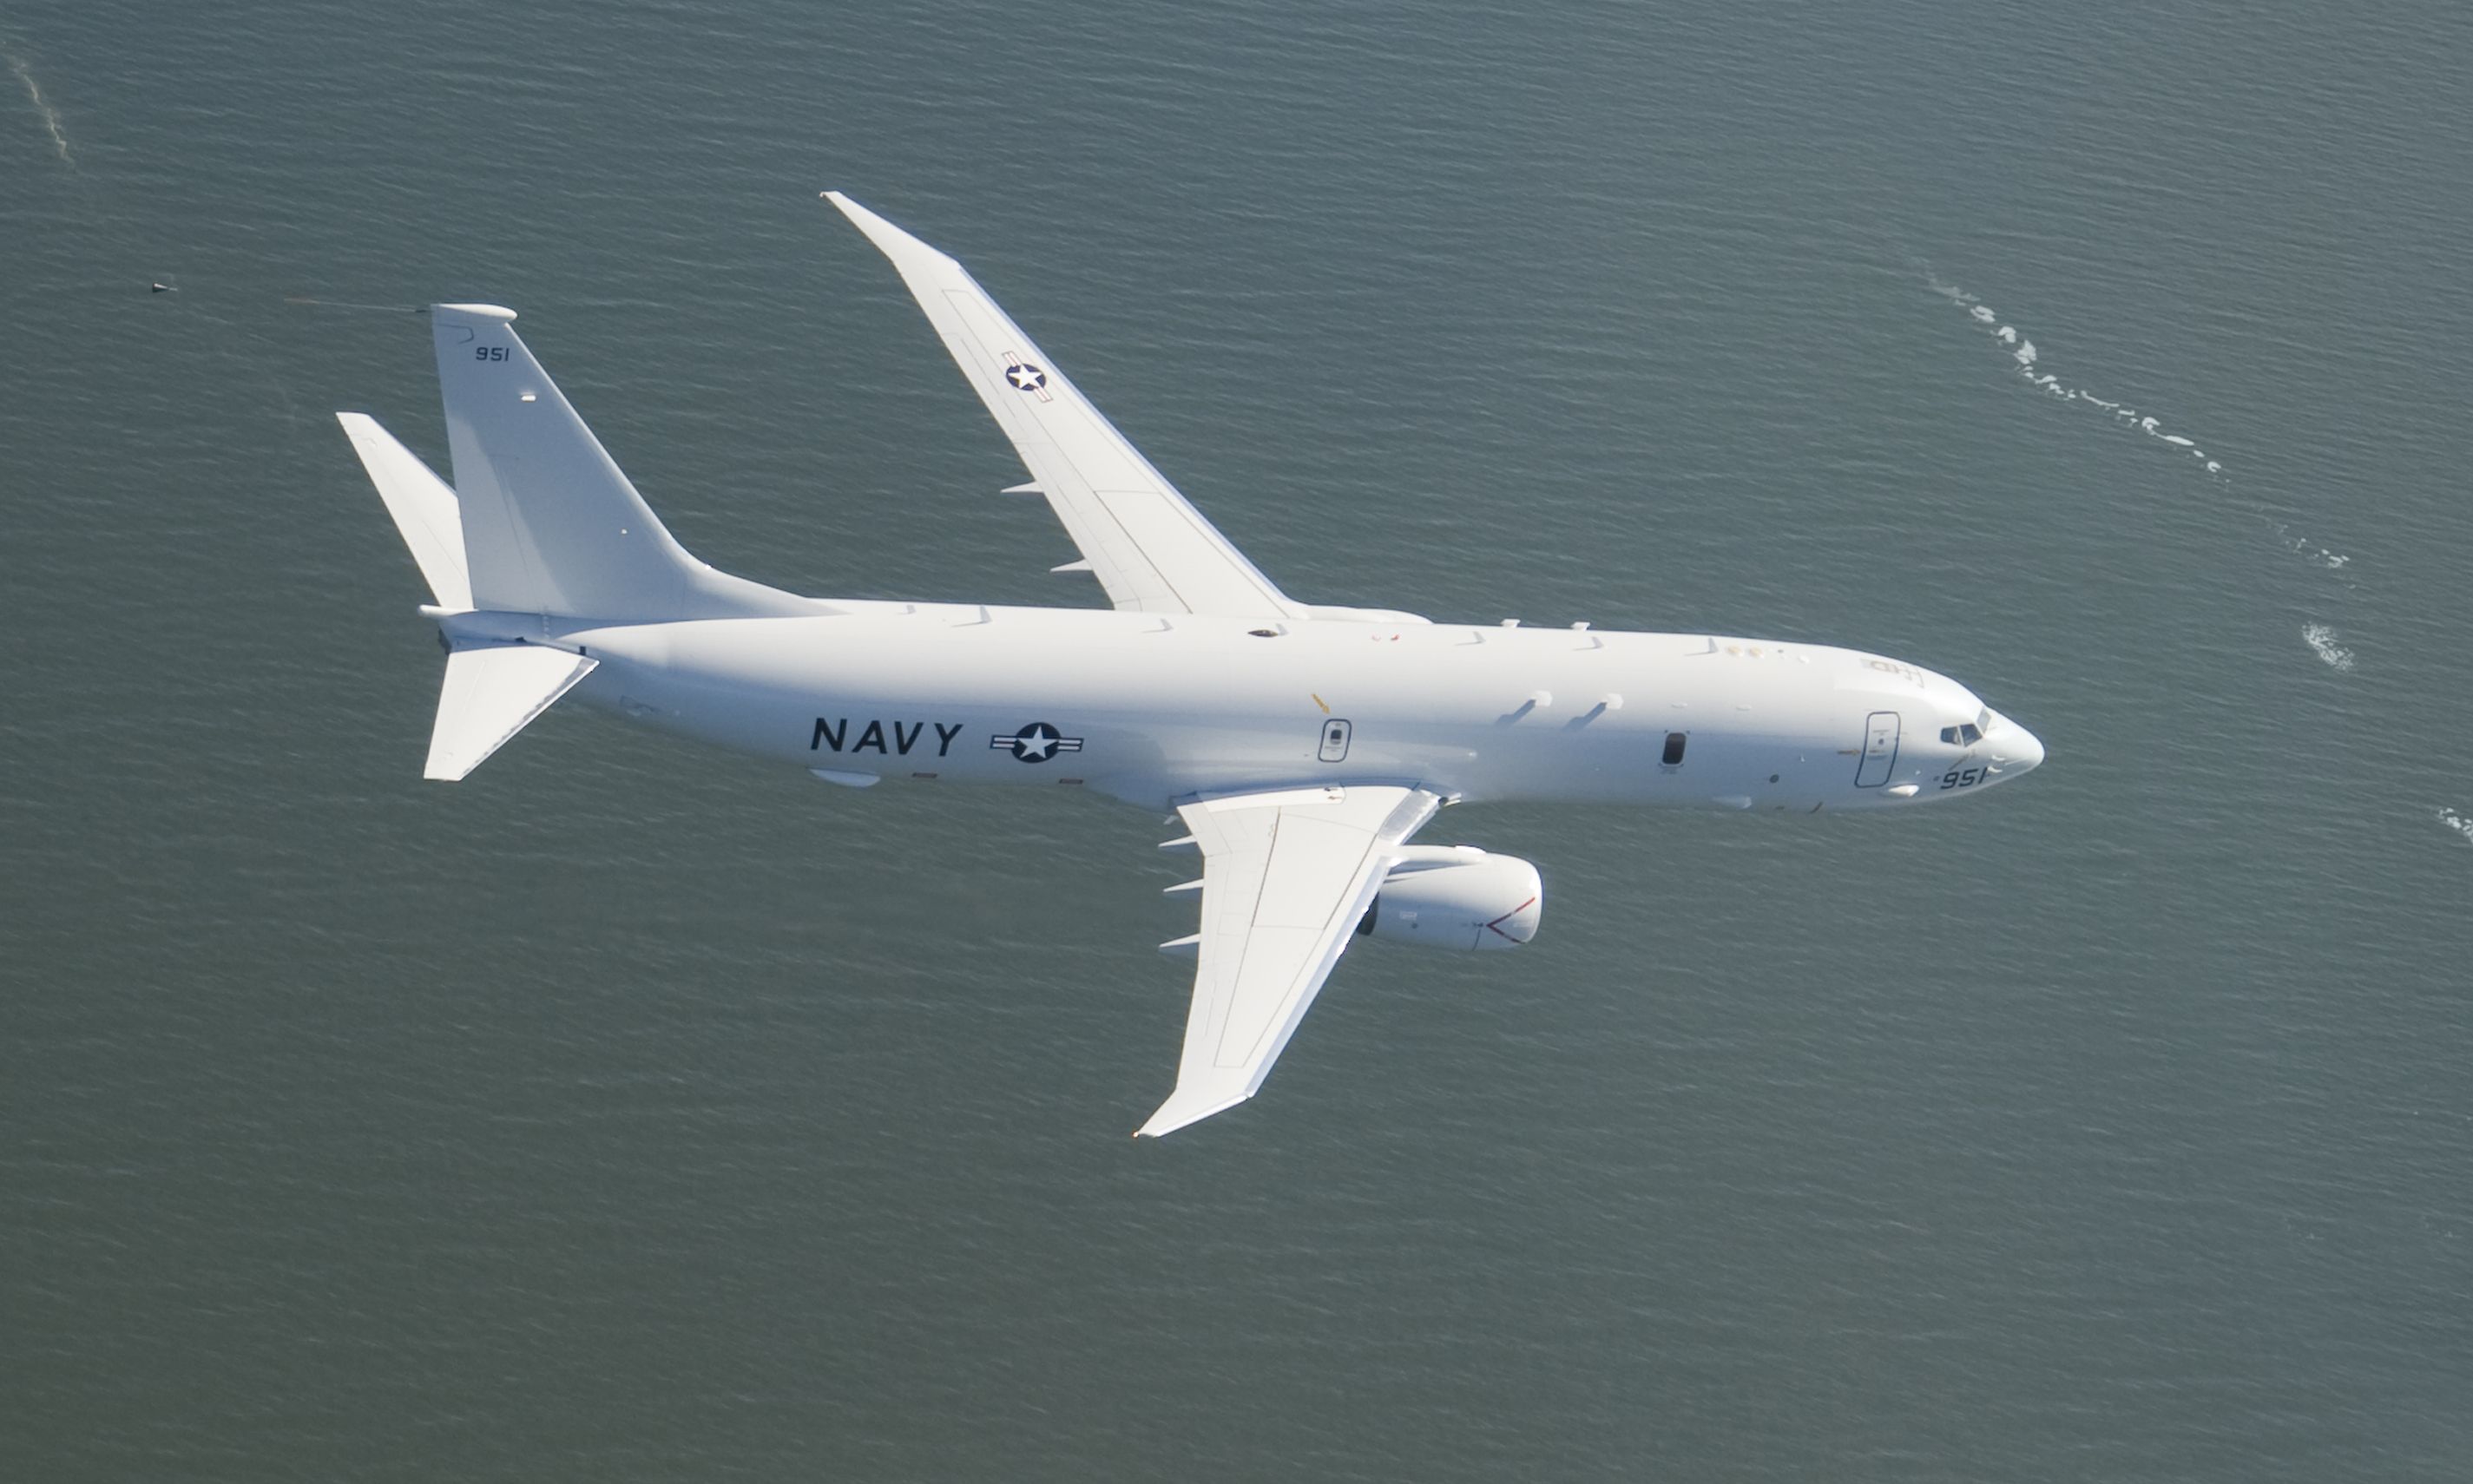 2 Boeing P-8 Poseidon HD Wallpapers | Backgrounds - Wallpaper Abyss